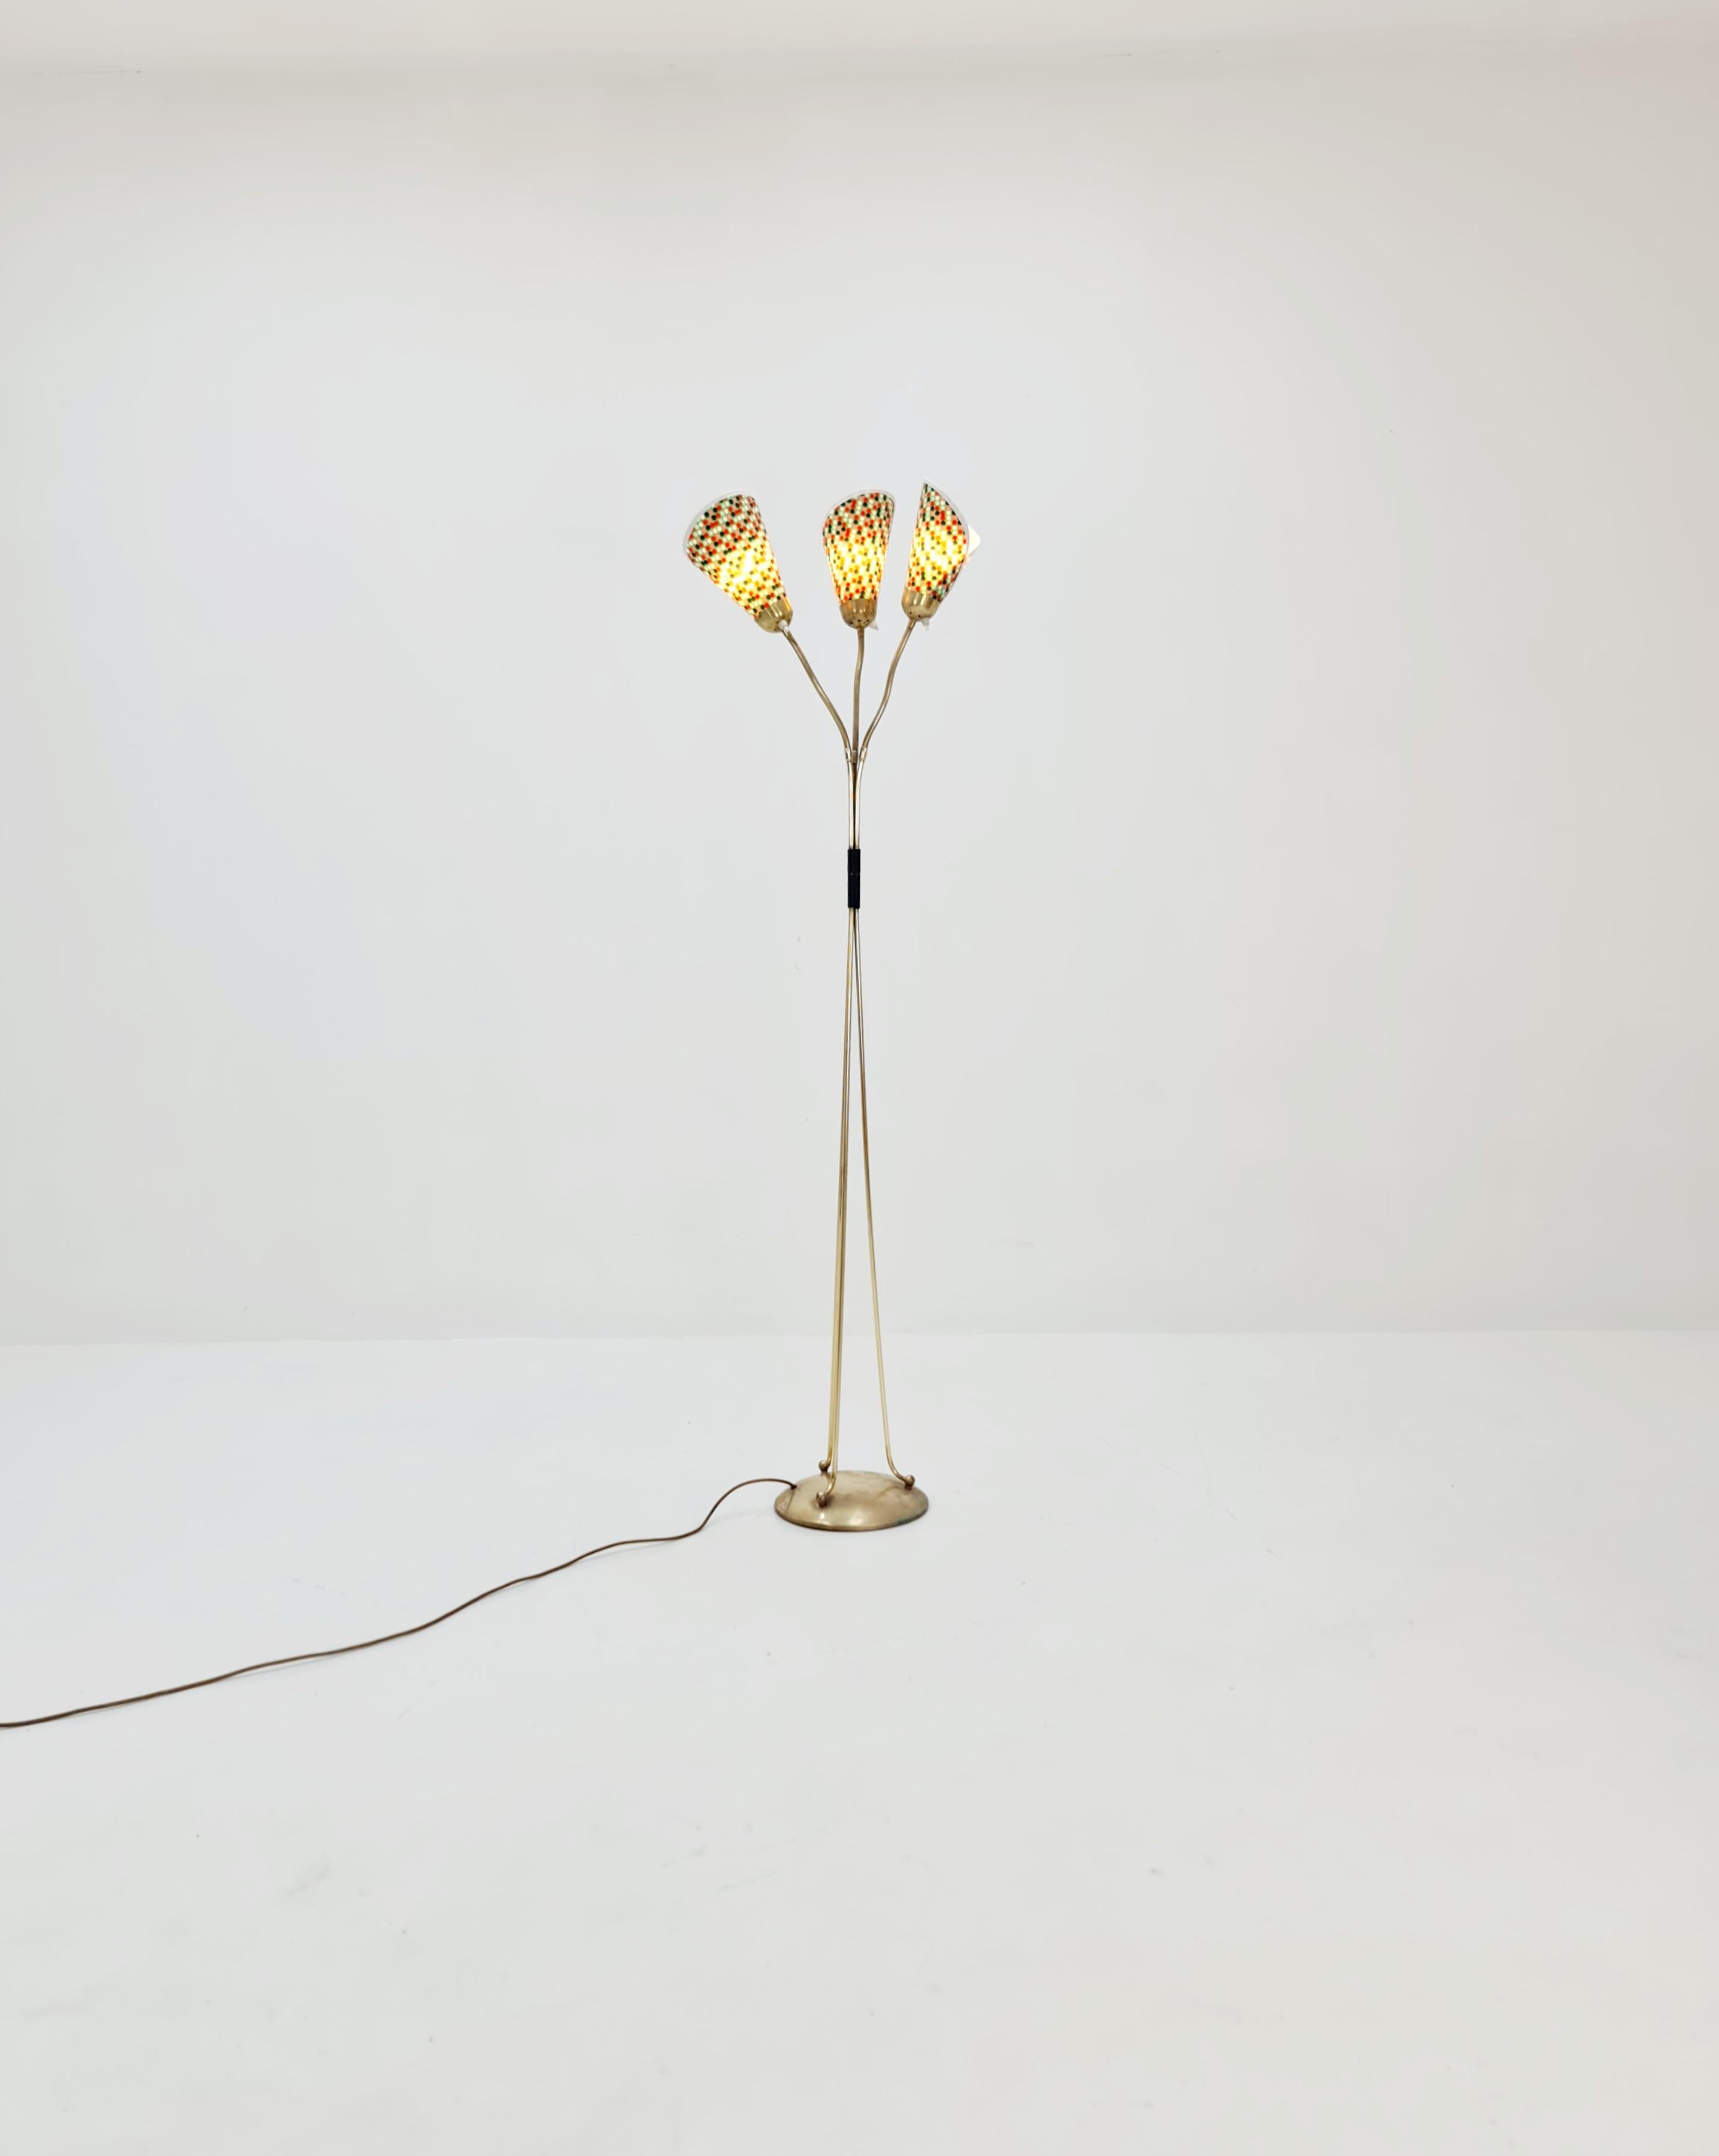 German Modern Colorful three flex arms brass floor lamp, tütenlampe, 1950s
Original shades from the 50s

This lamp is a real eye-catcher, amazing colors. 

The frame is made of brass, with flex arms. 3 switches on the arms

Measurements:
 
Height: